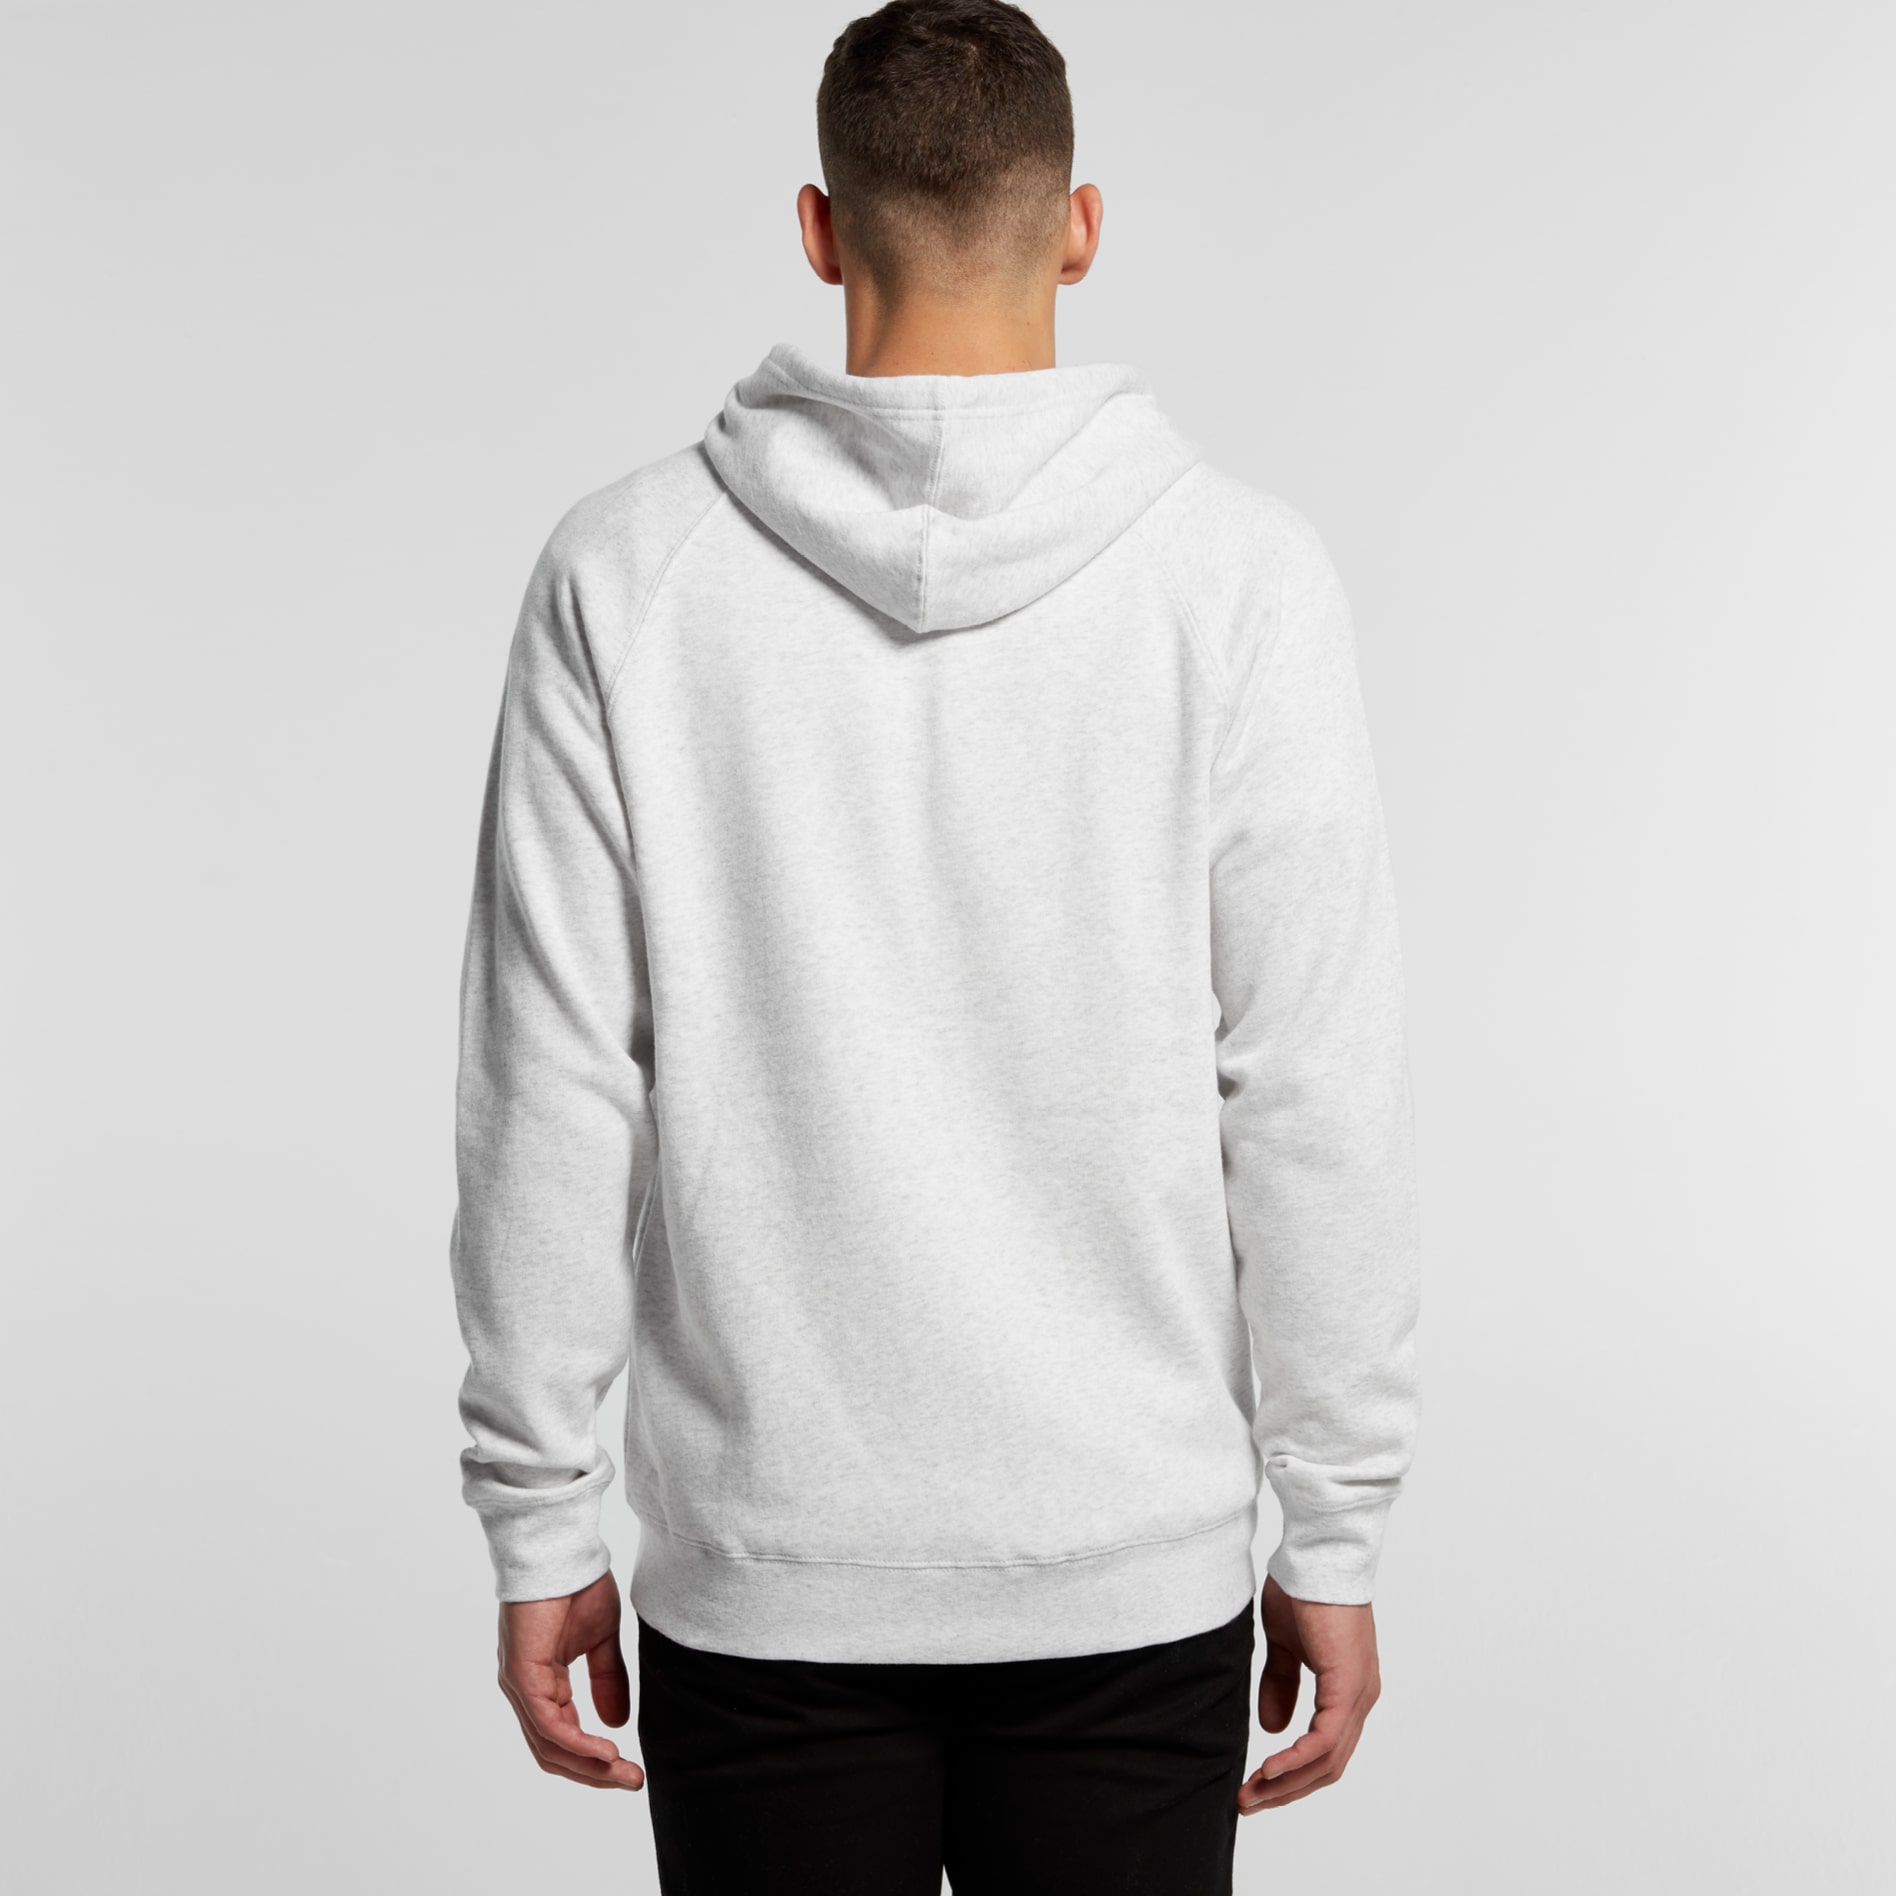 Best hoodies for men to personalise: which one's perfect for your team? - 5103 official zip hood back